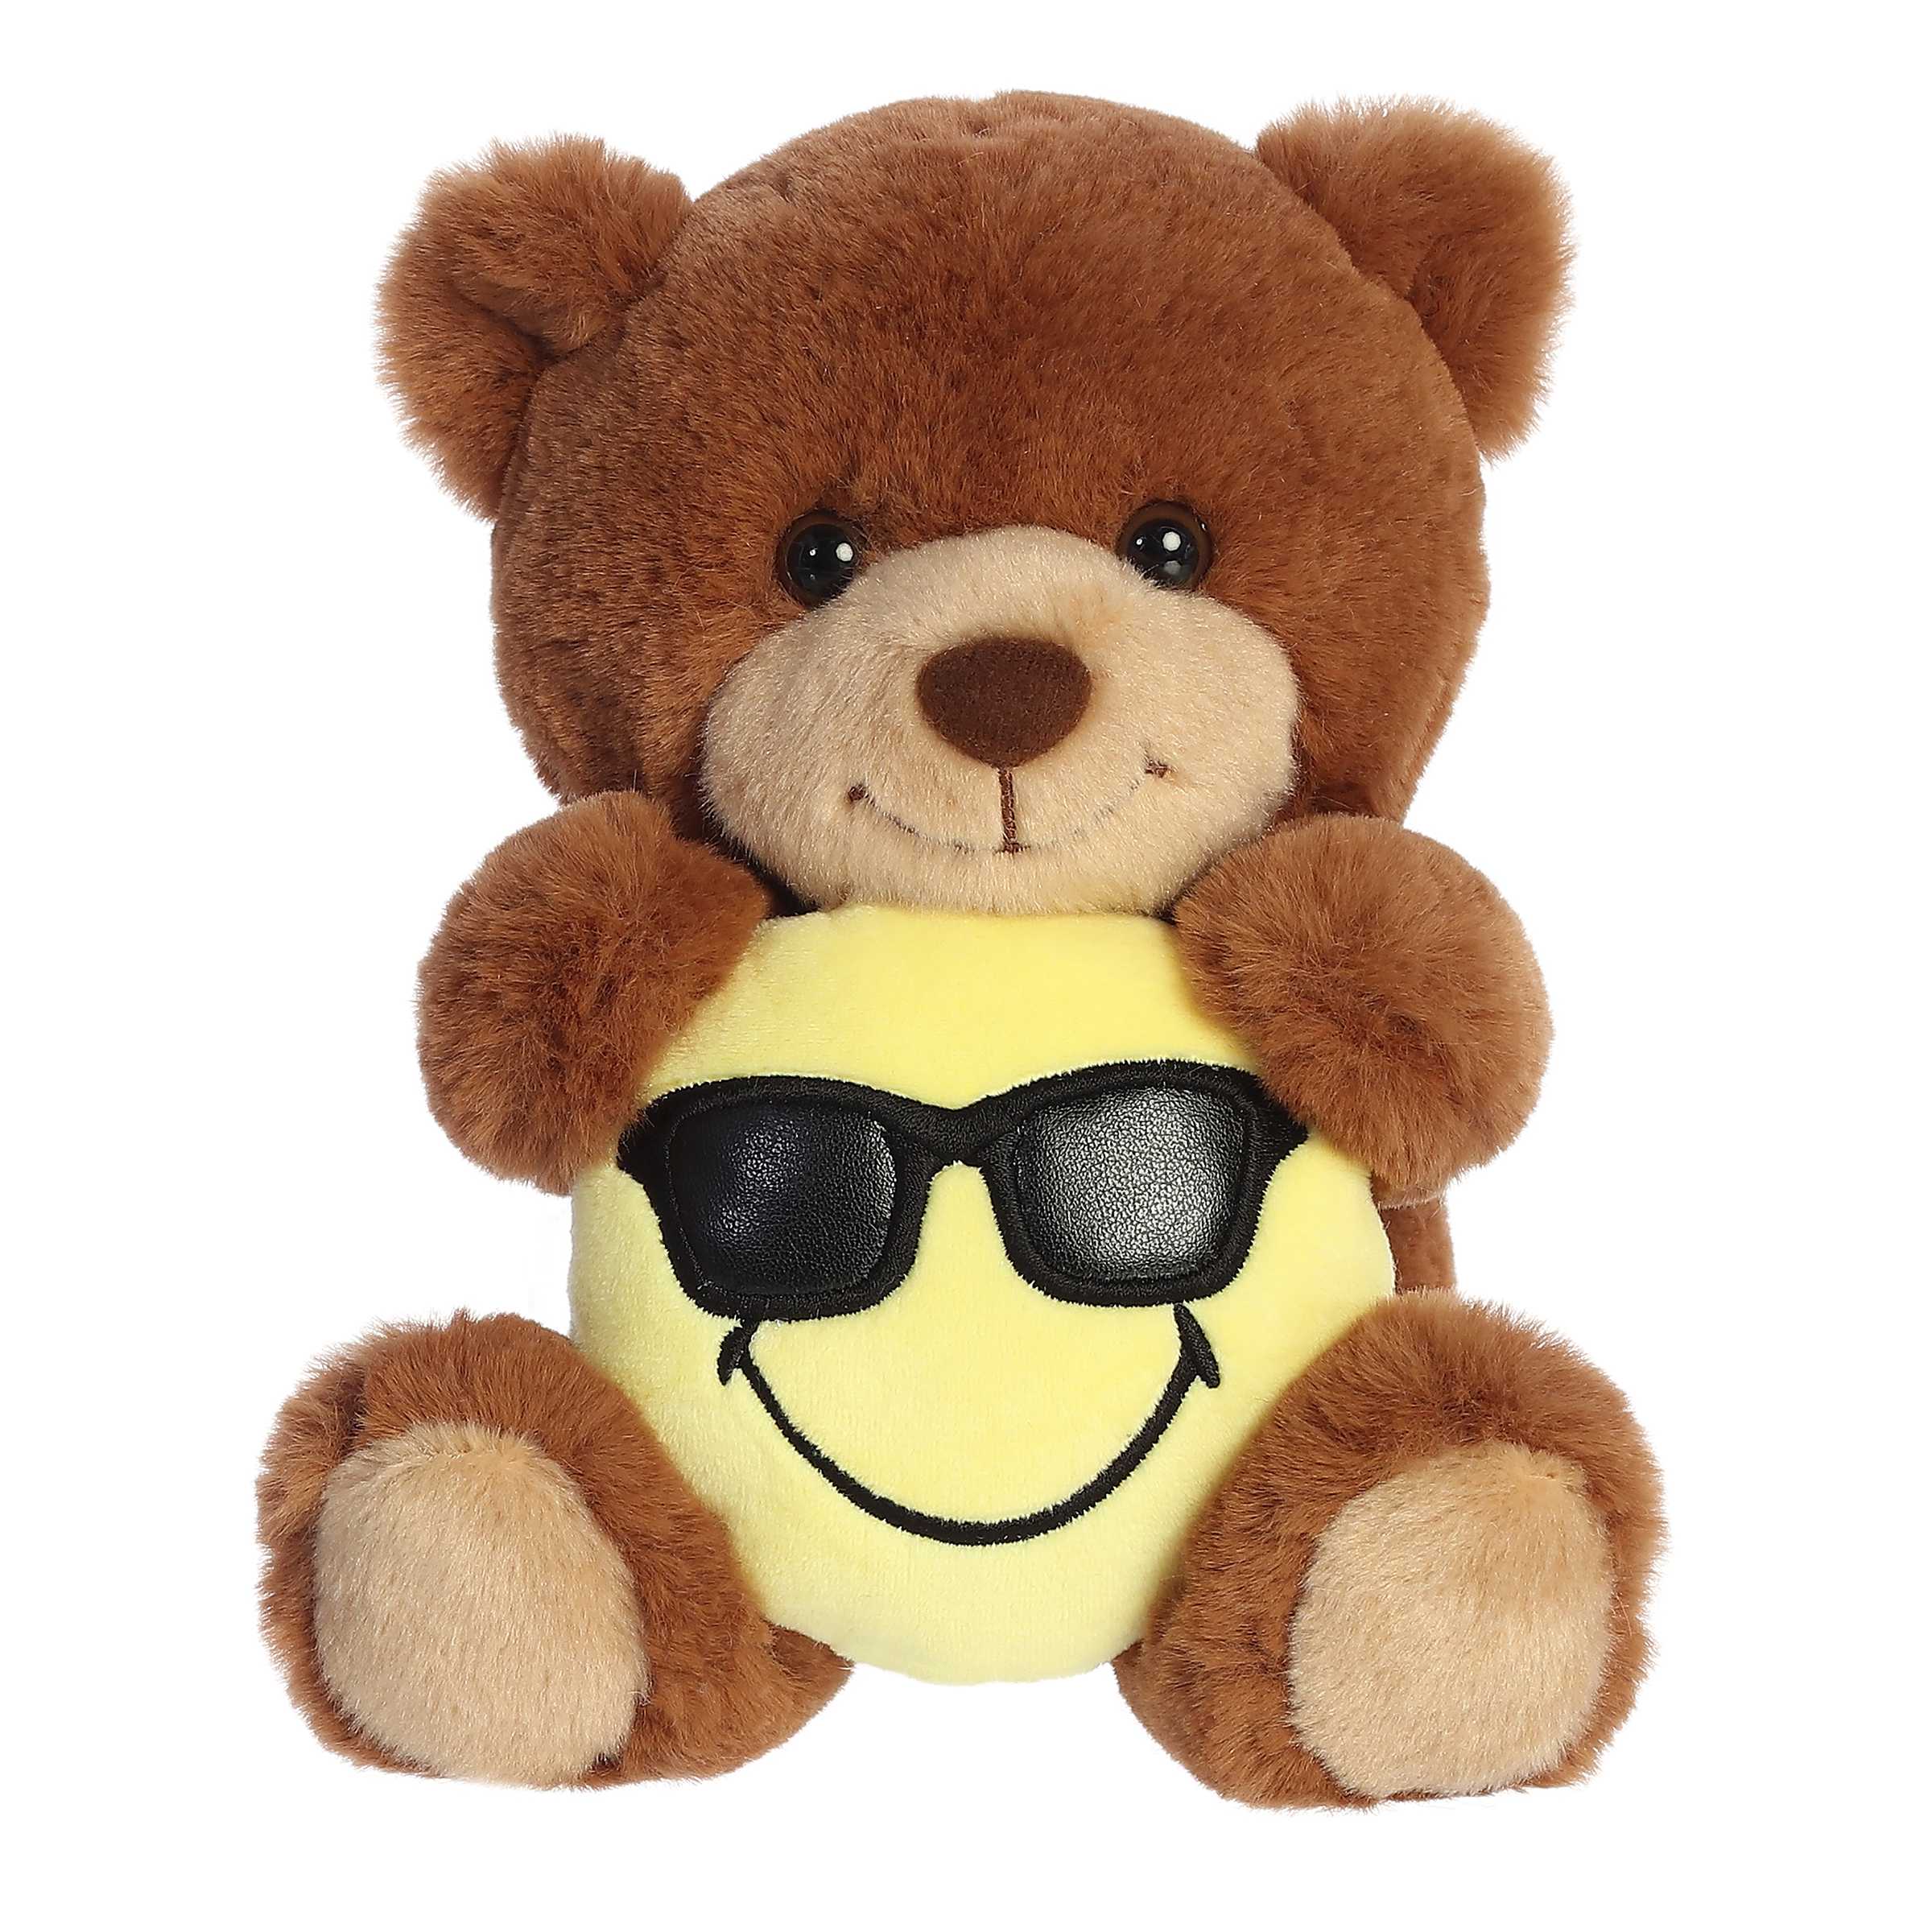 Shades Bear from SmileyWorld, featuring stylish shades and a sunny smile